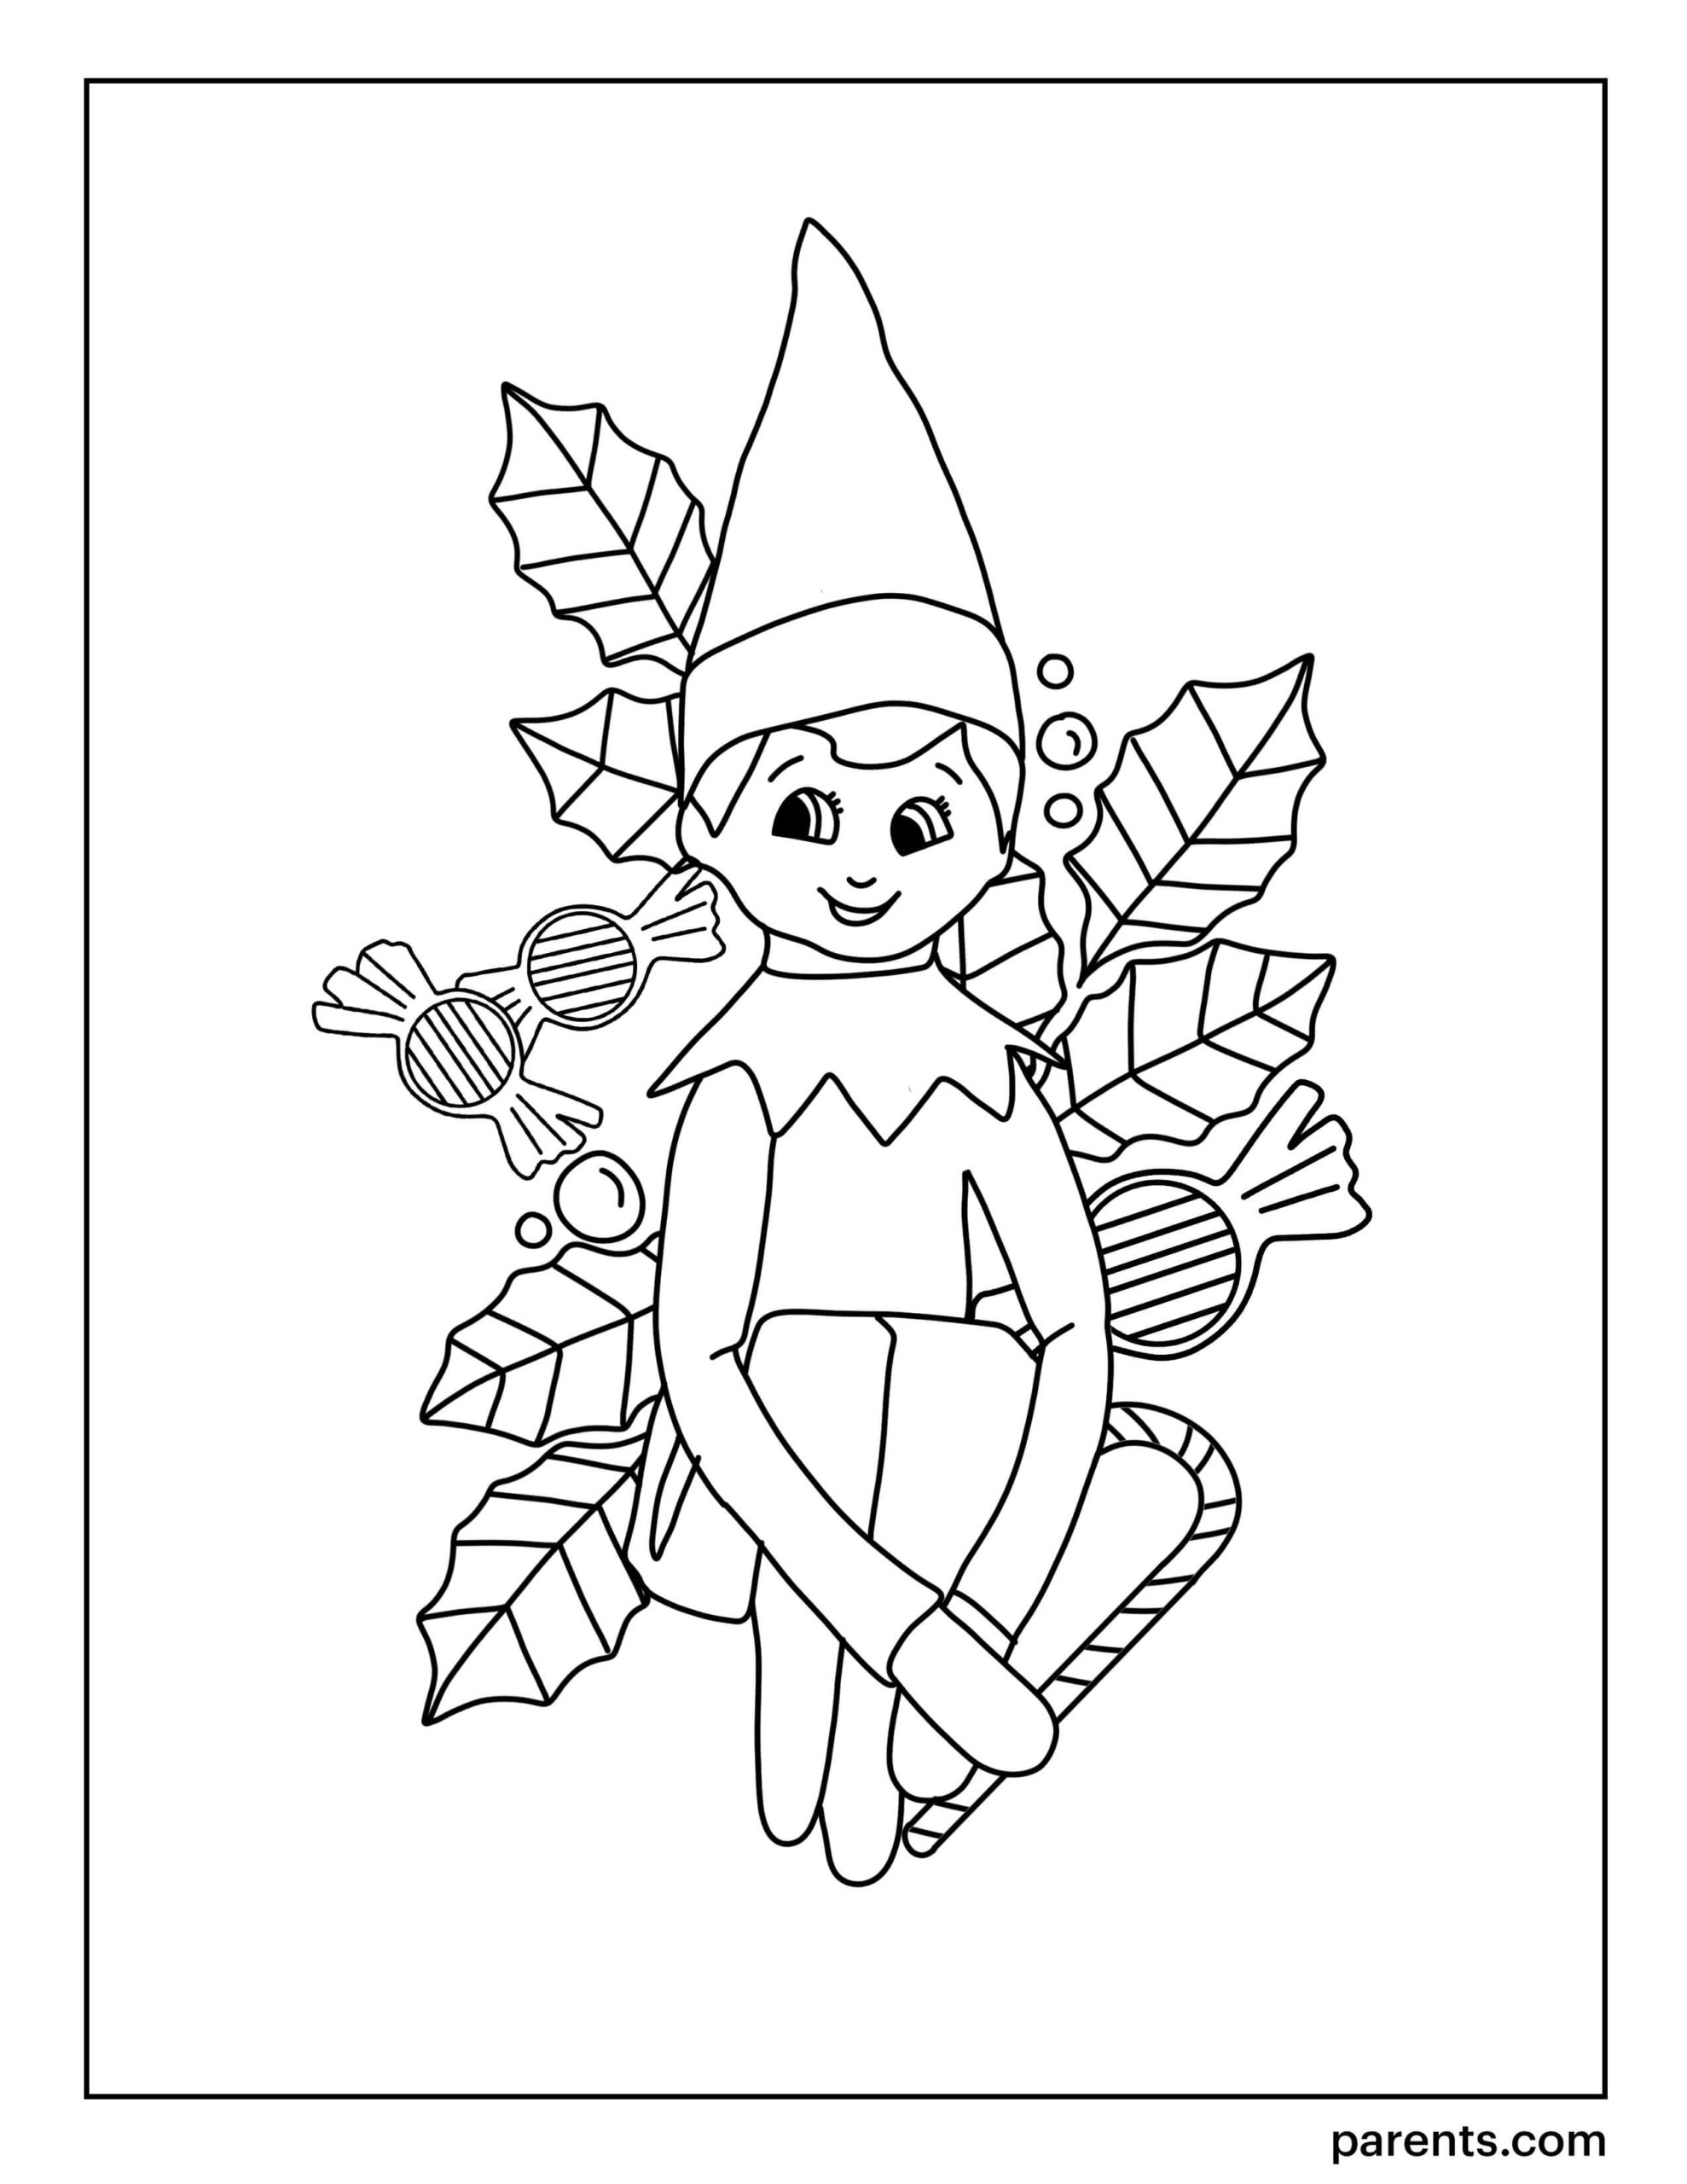 20 Printable Elf Coloring Pages to Enjoy the Holidays   Happier Human